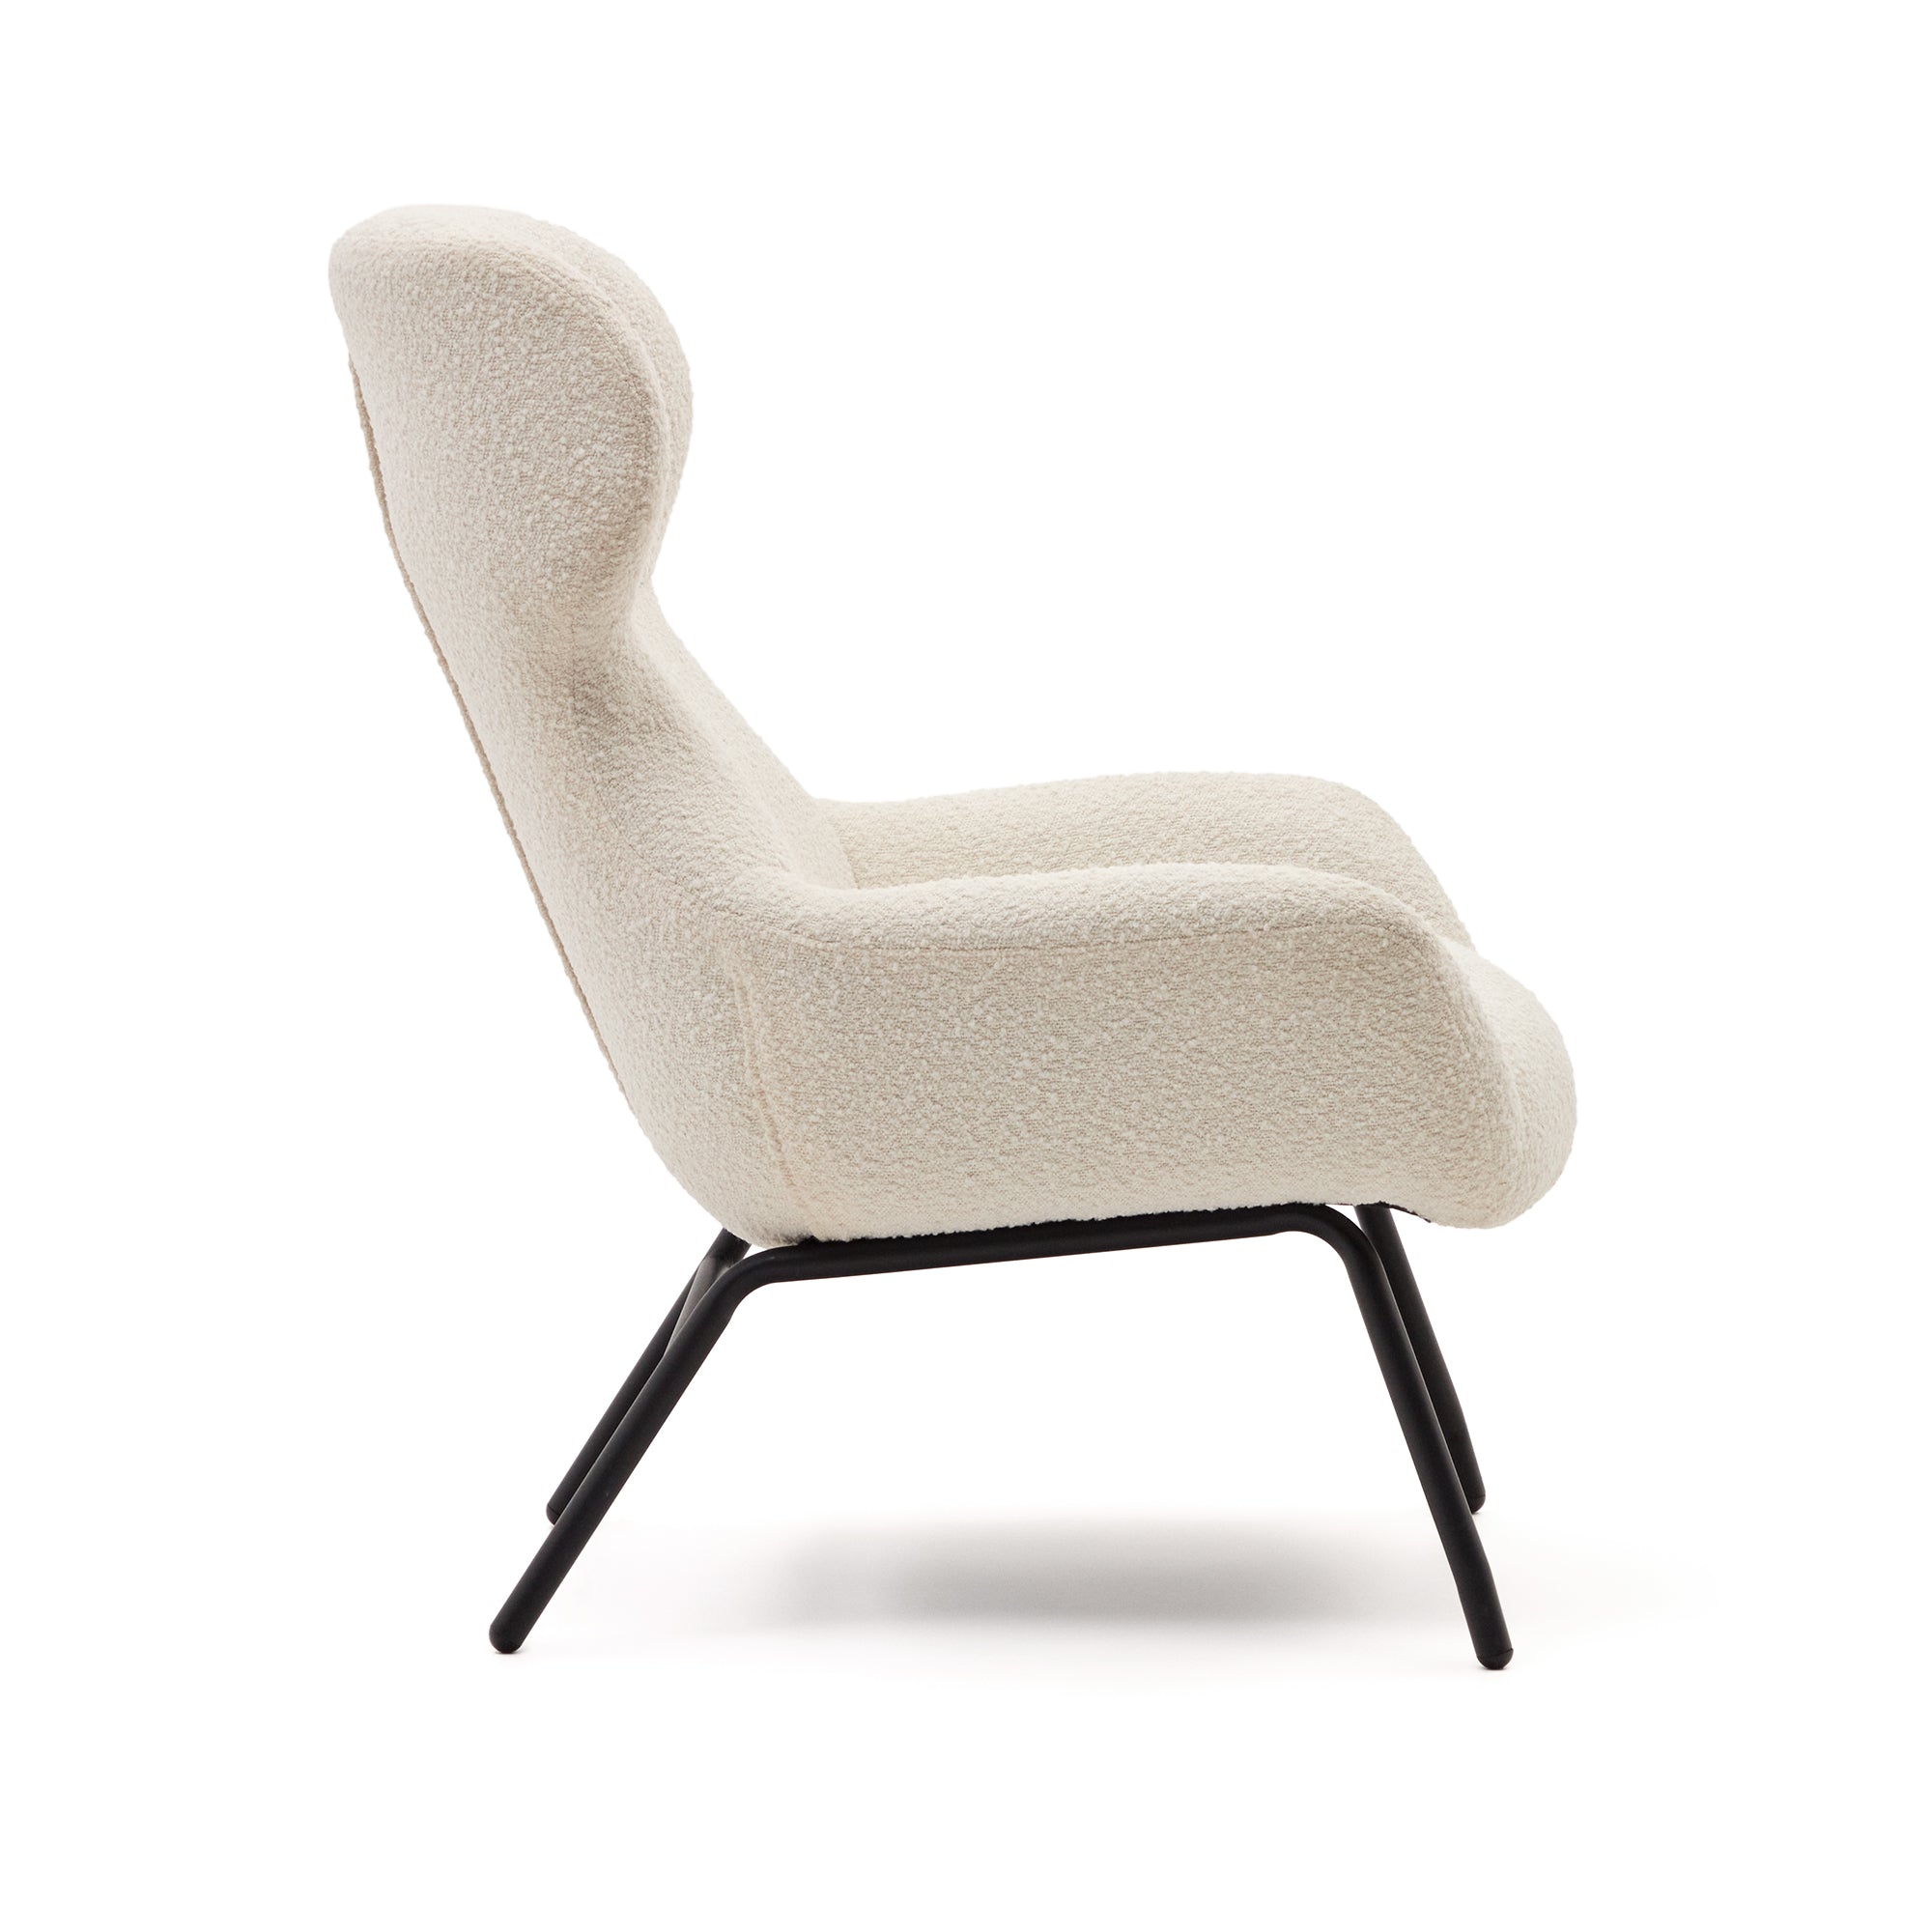 Belina armchair in white shearling and steel with black finish